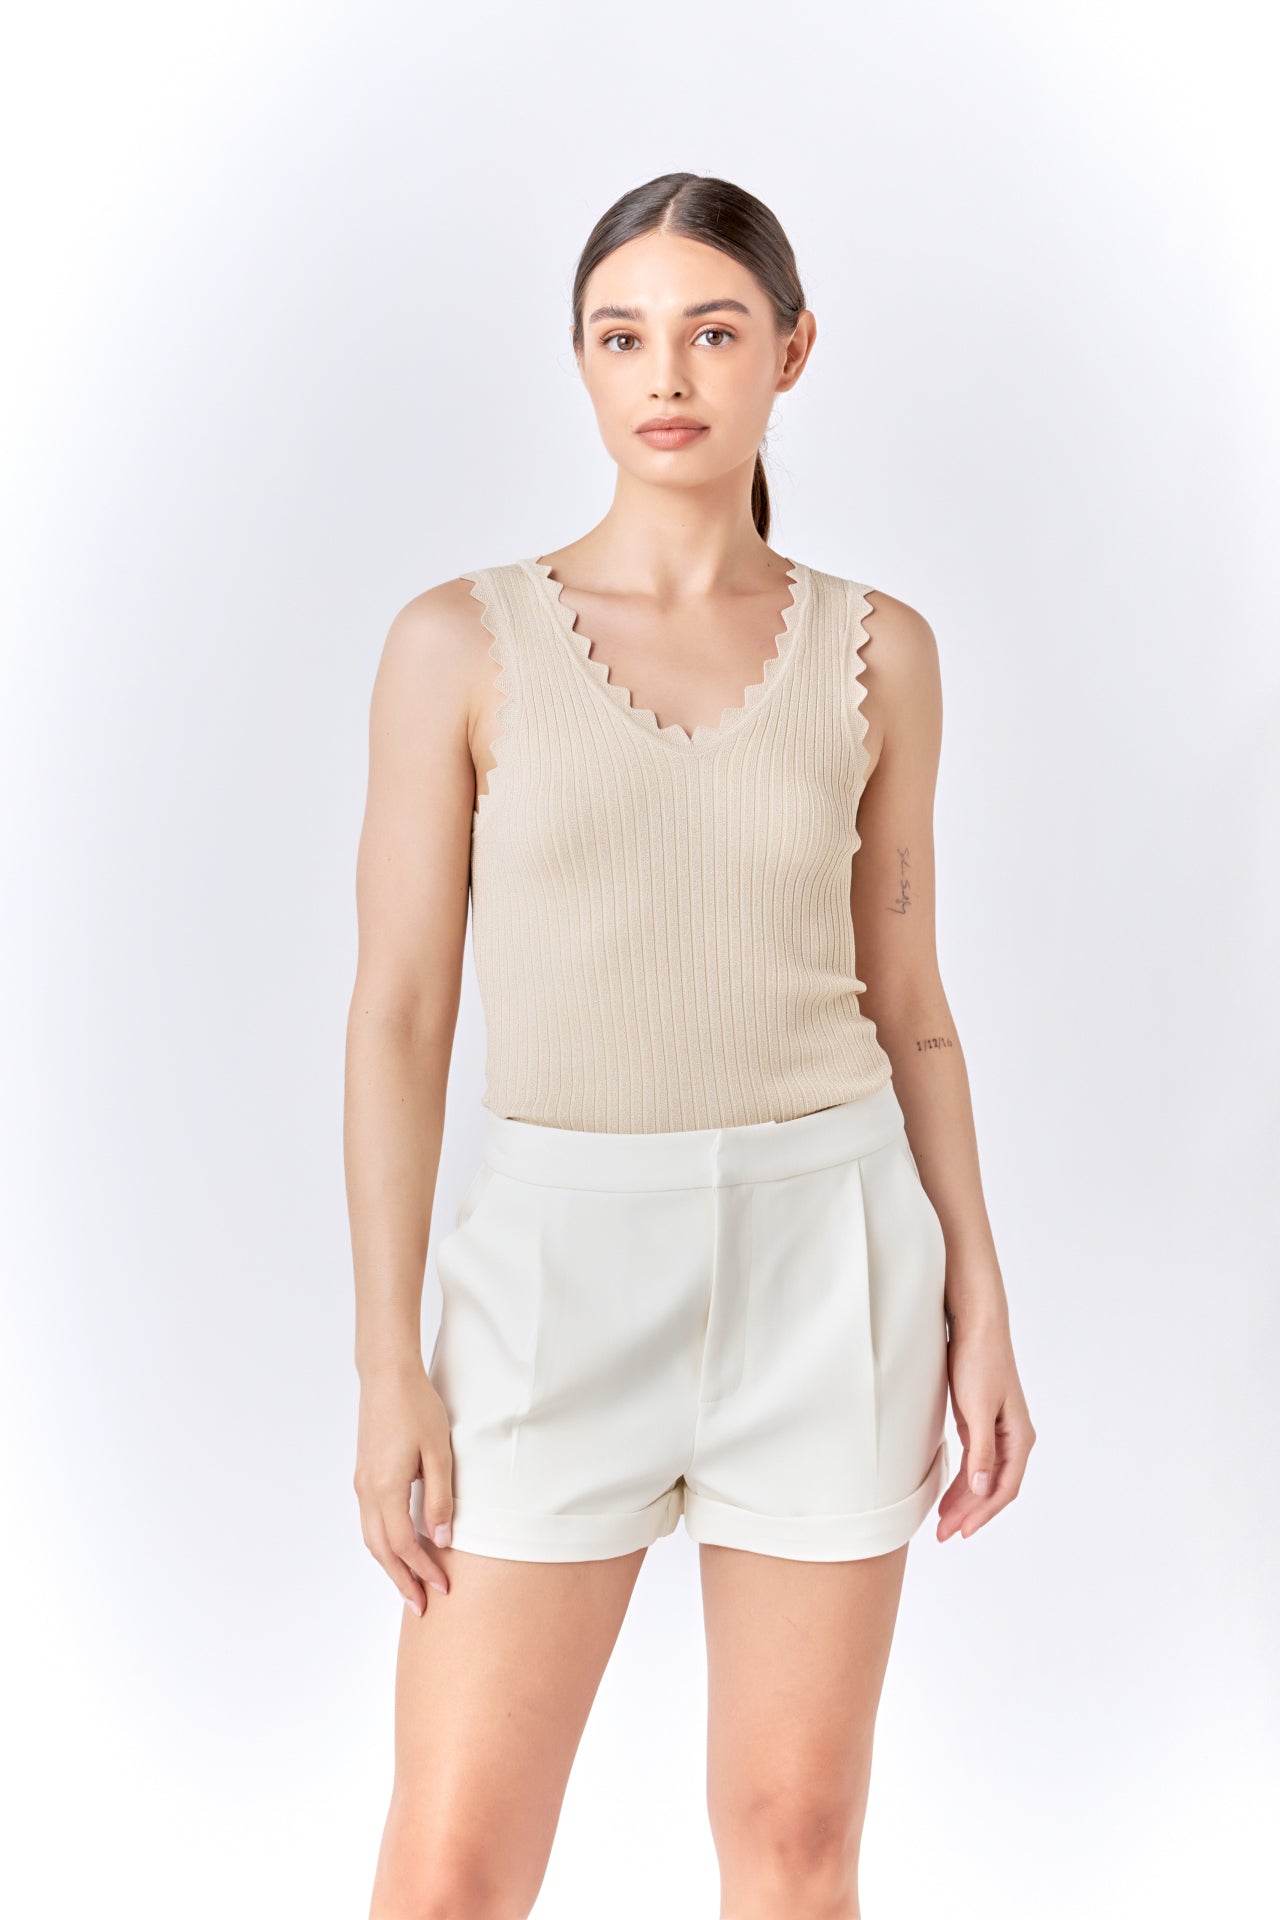 ENDLESS ROSE - Scallop Detail Sleeveless Top - TOPS available at Objectrare